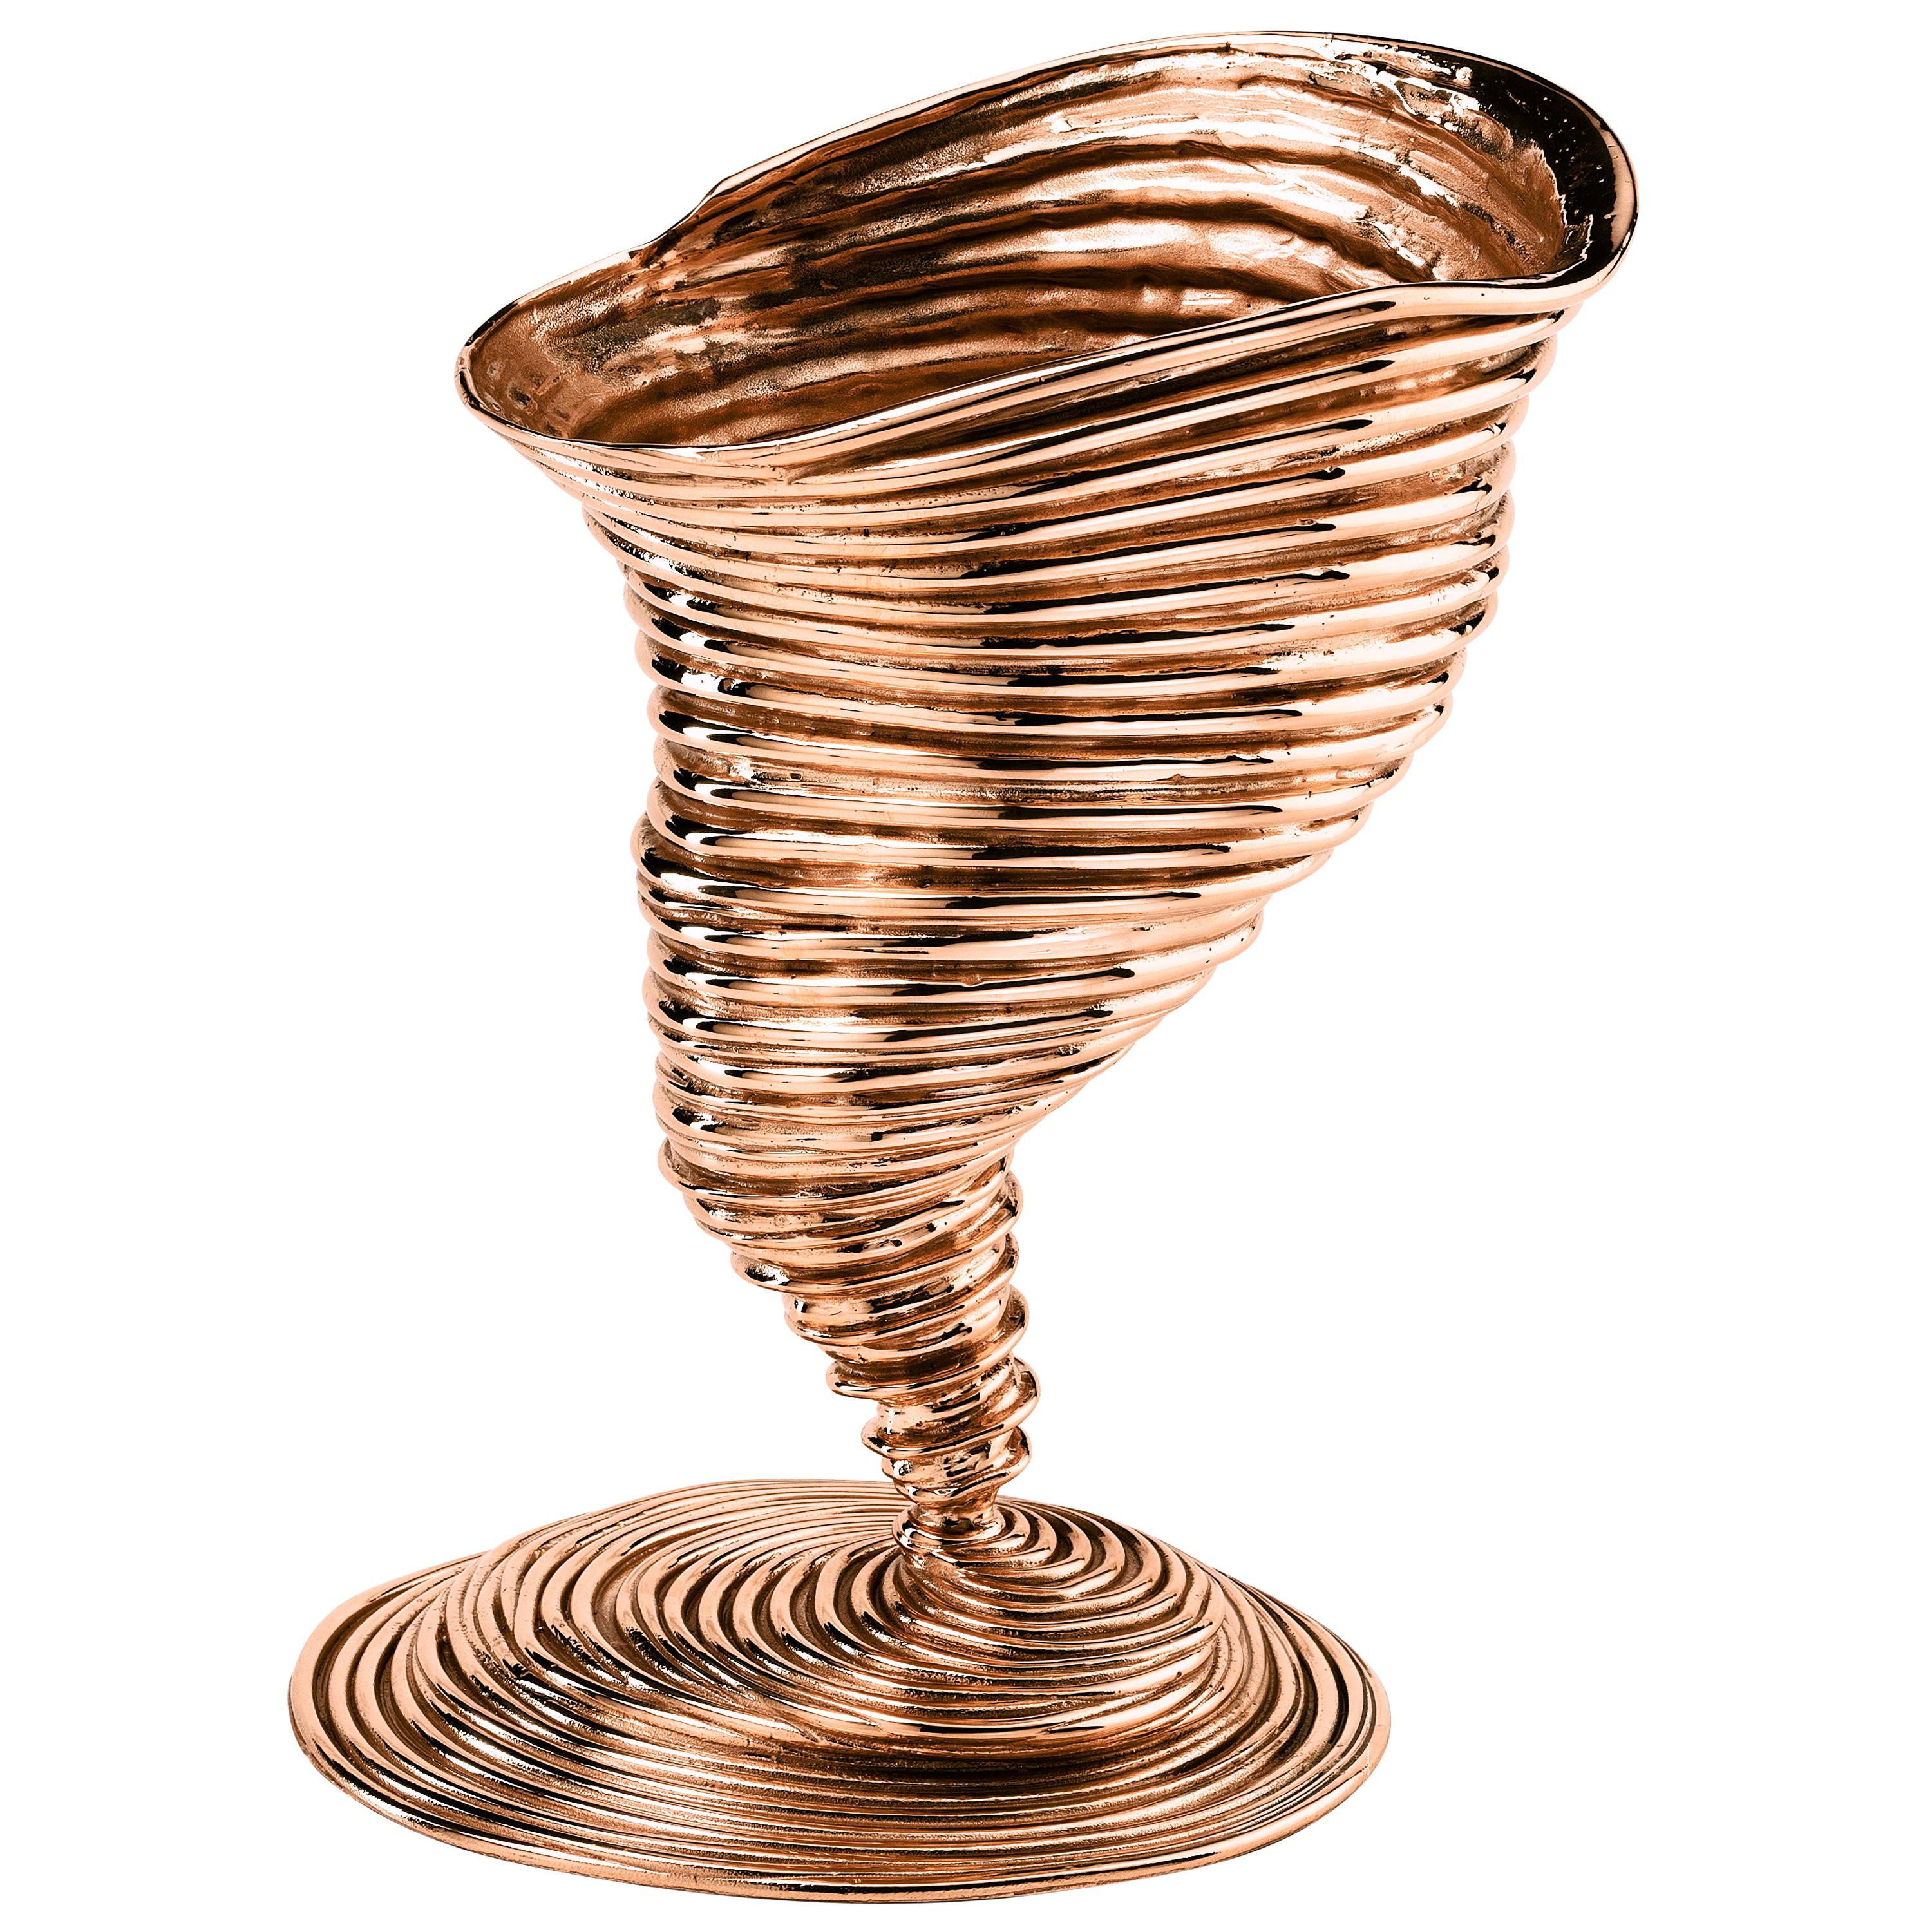 Ghidini 1961 Tornado Sculptural Vase in Bronze by Campana Brothers For Sale